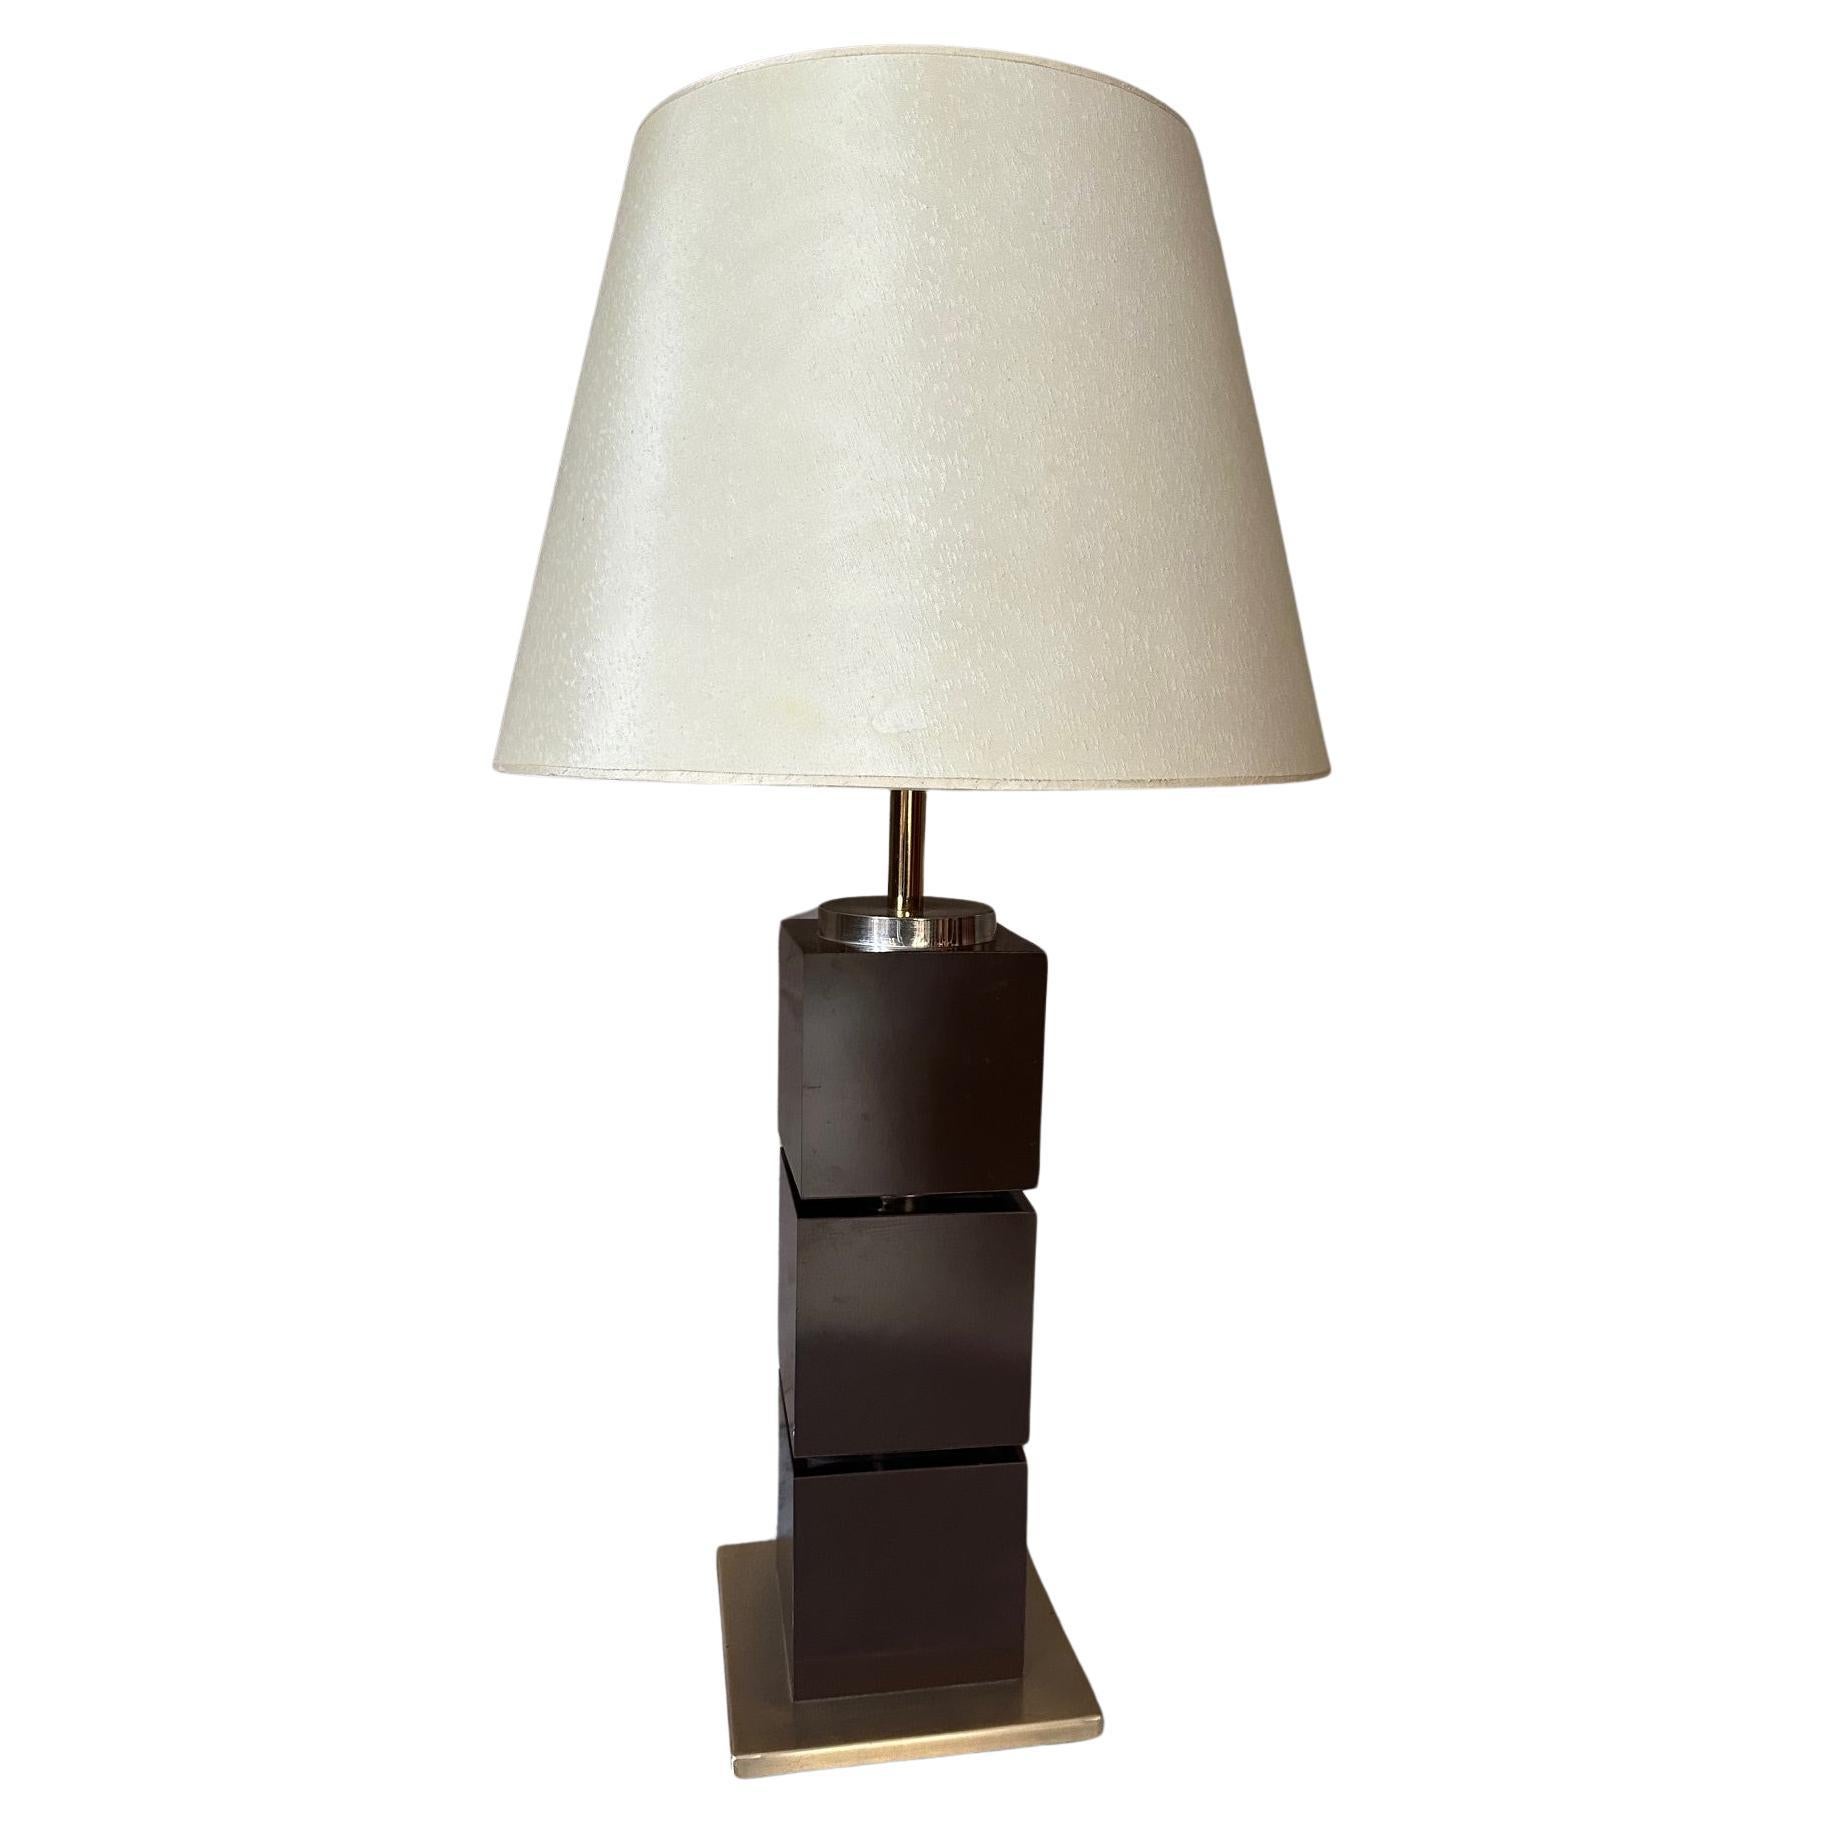 Mid-century French Design Brass and Lacquered Wood Table Lamp